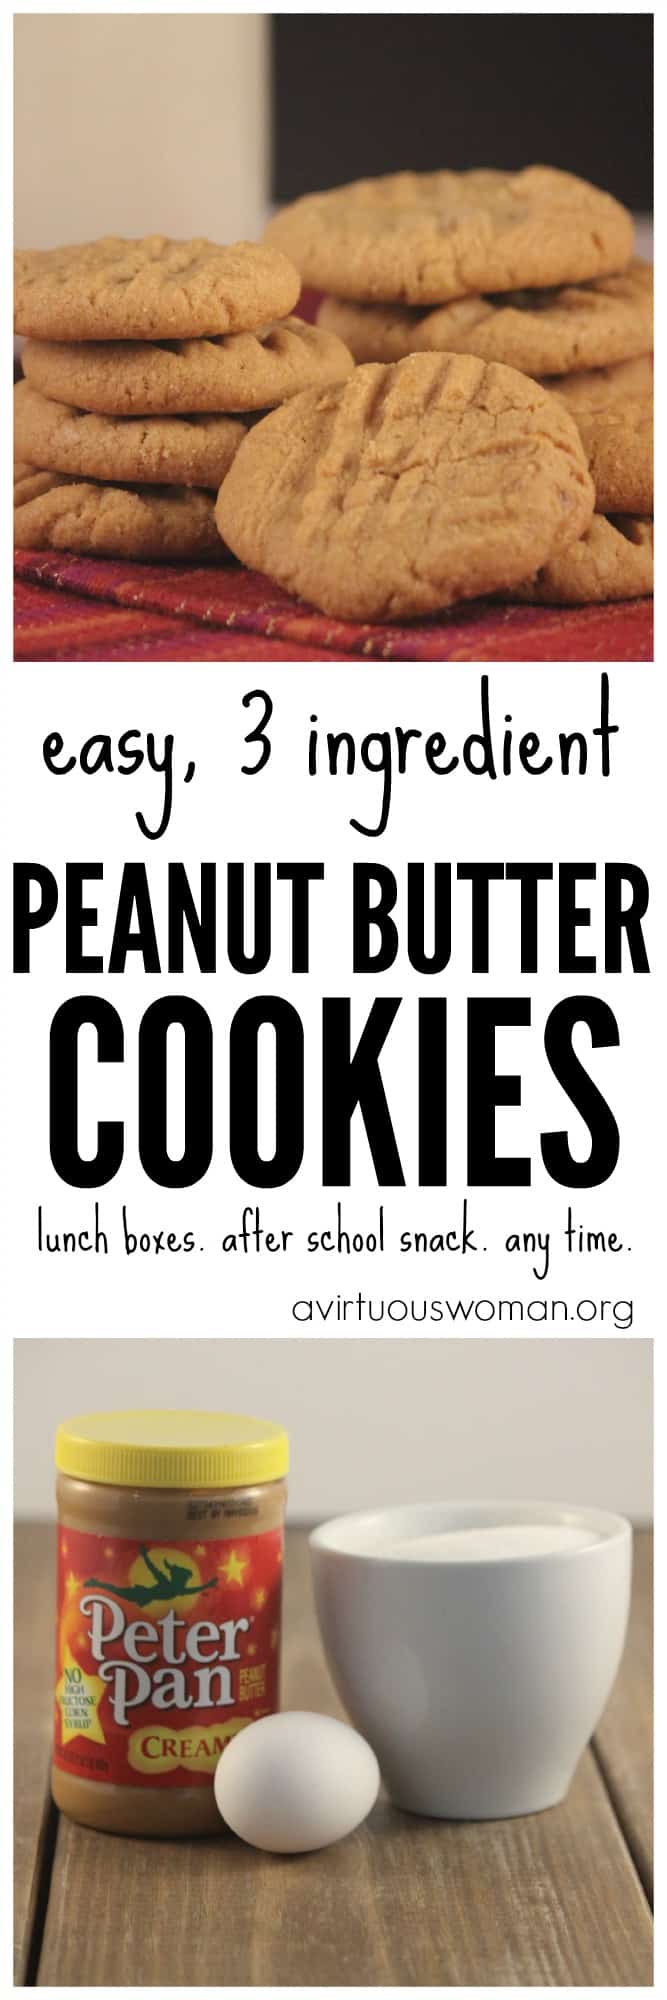 Easy Peanut Butter Cookies - Only 3 Ingredients! Plus, they're gluten free! @ AVirtuousWoman.org